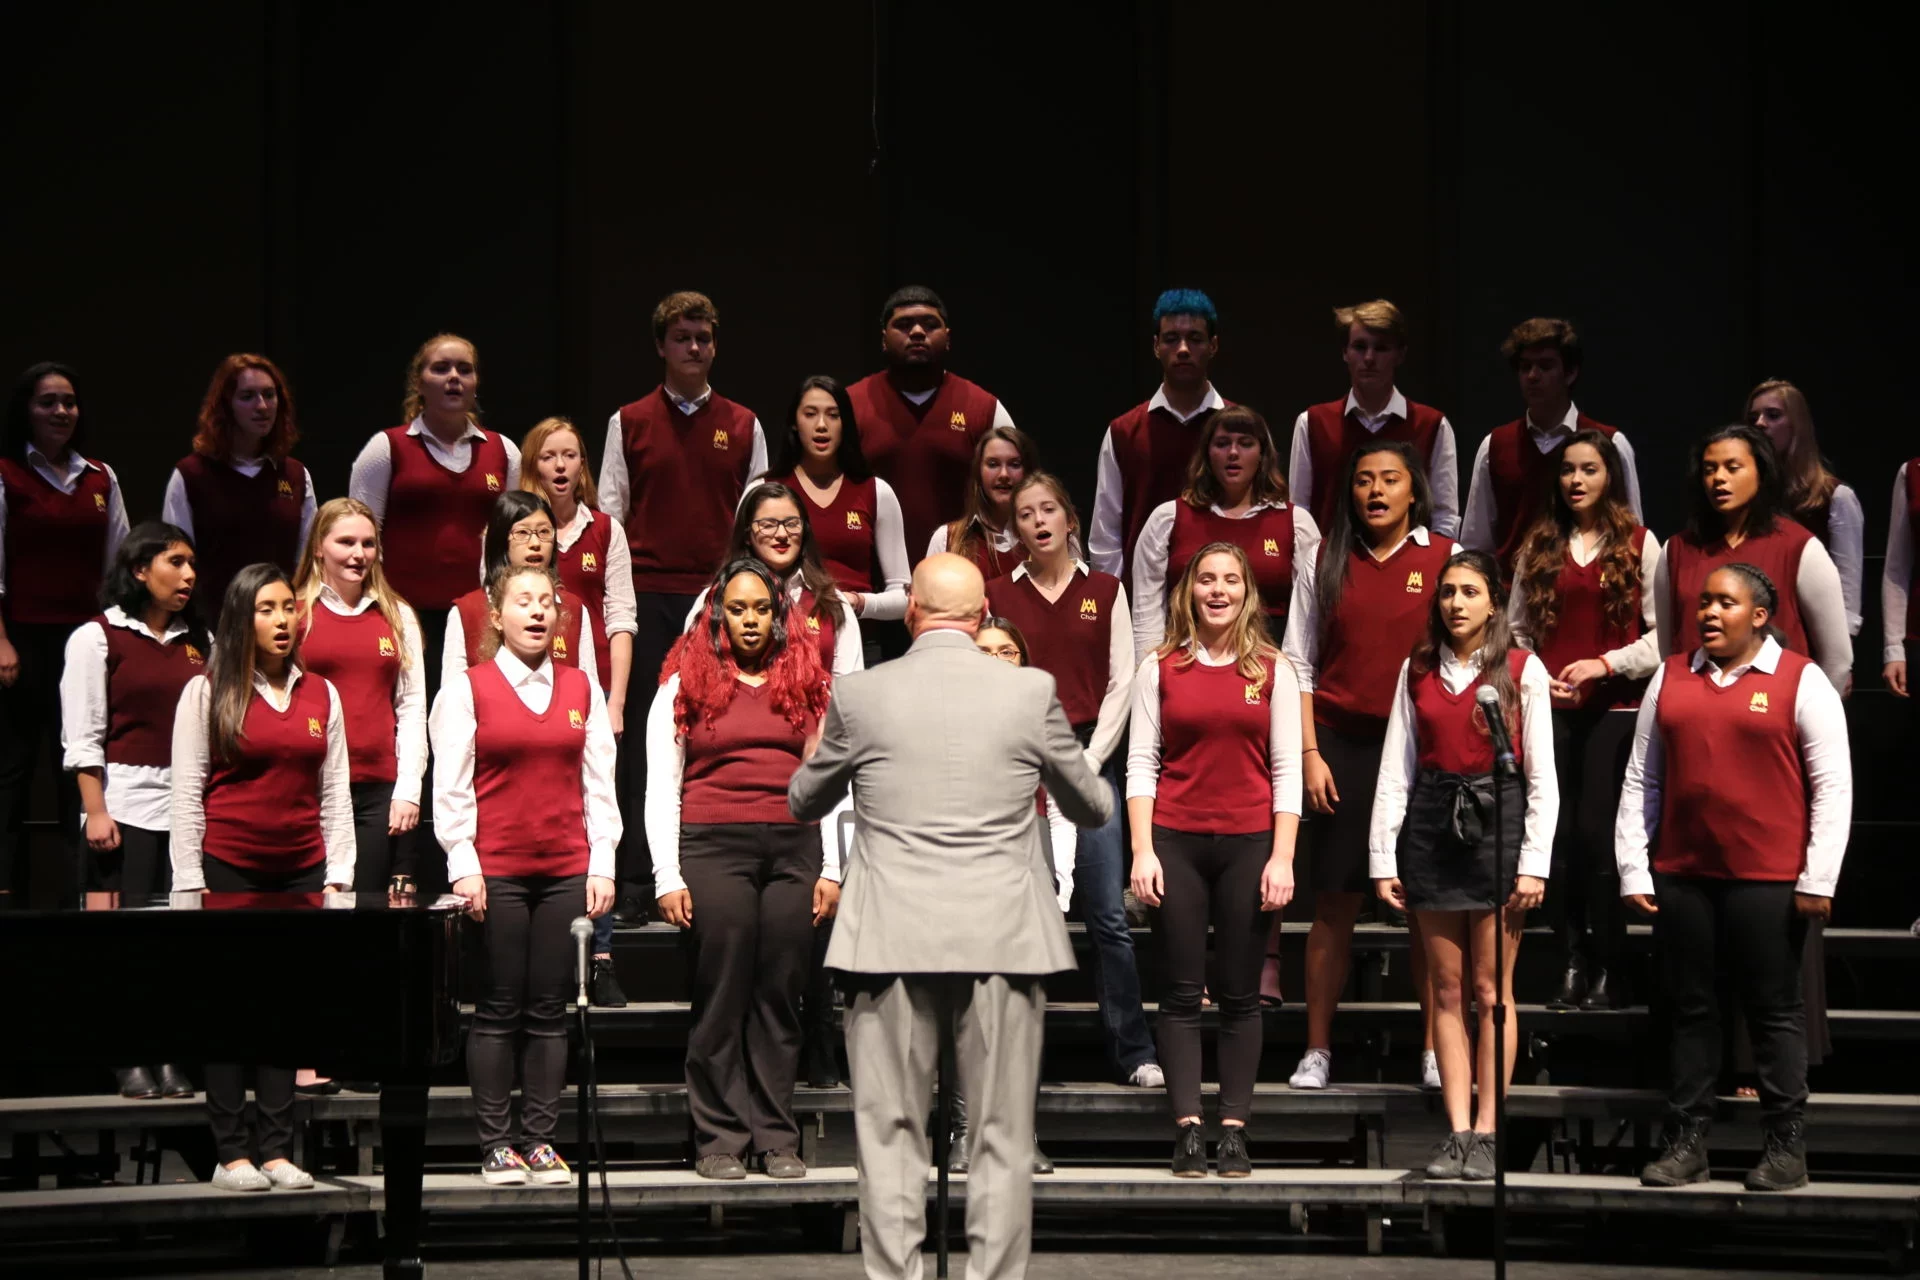 Choir and guitar concert rings in holiday spirit